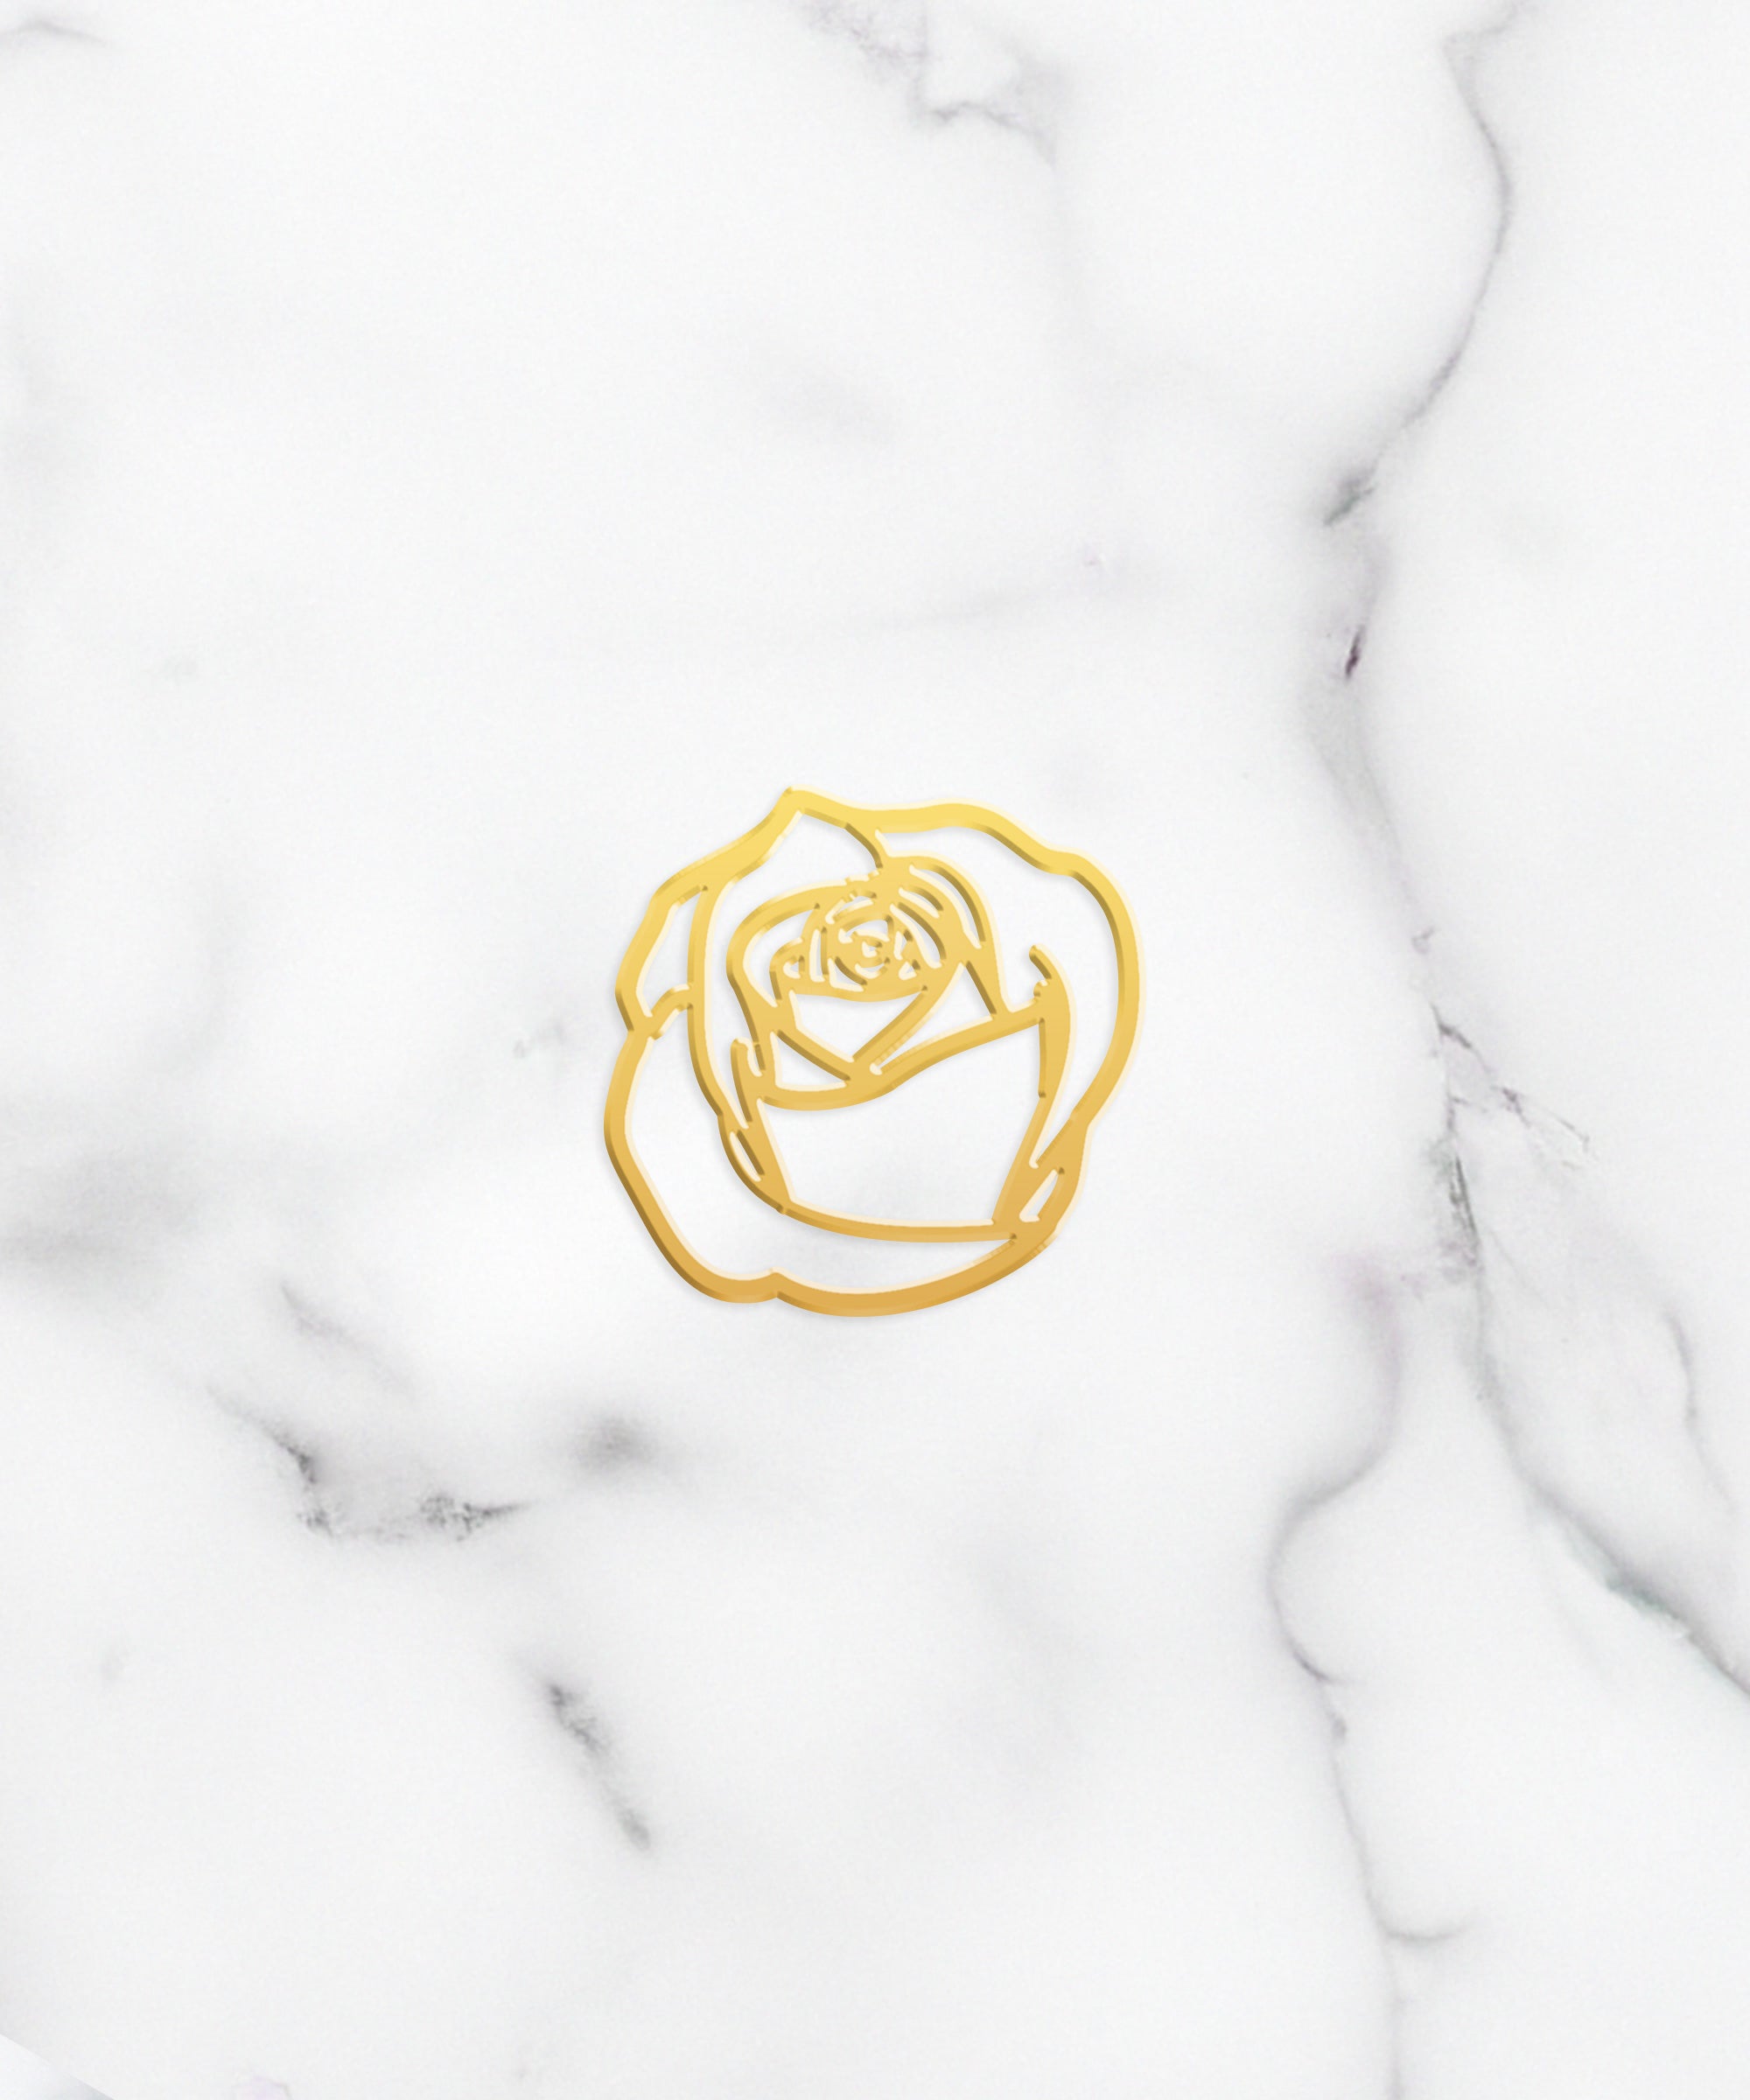 Rose Charm - High Quality, Affordable, Whimsical, Hand Drawn Individual Charms for a Custom Locket - June Birthday Gift - Available in Gold and Silver - Made in USA - Brevity Jewelry